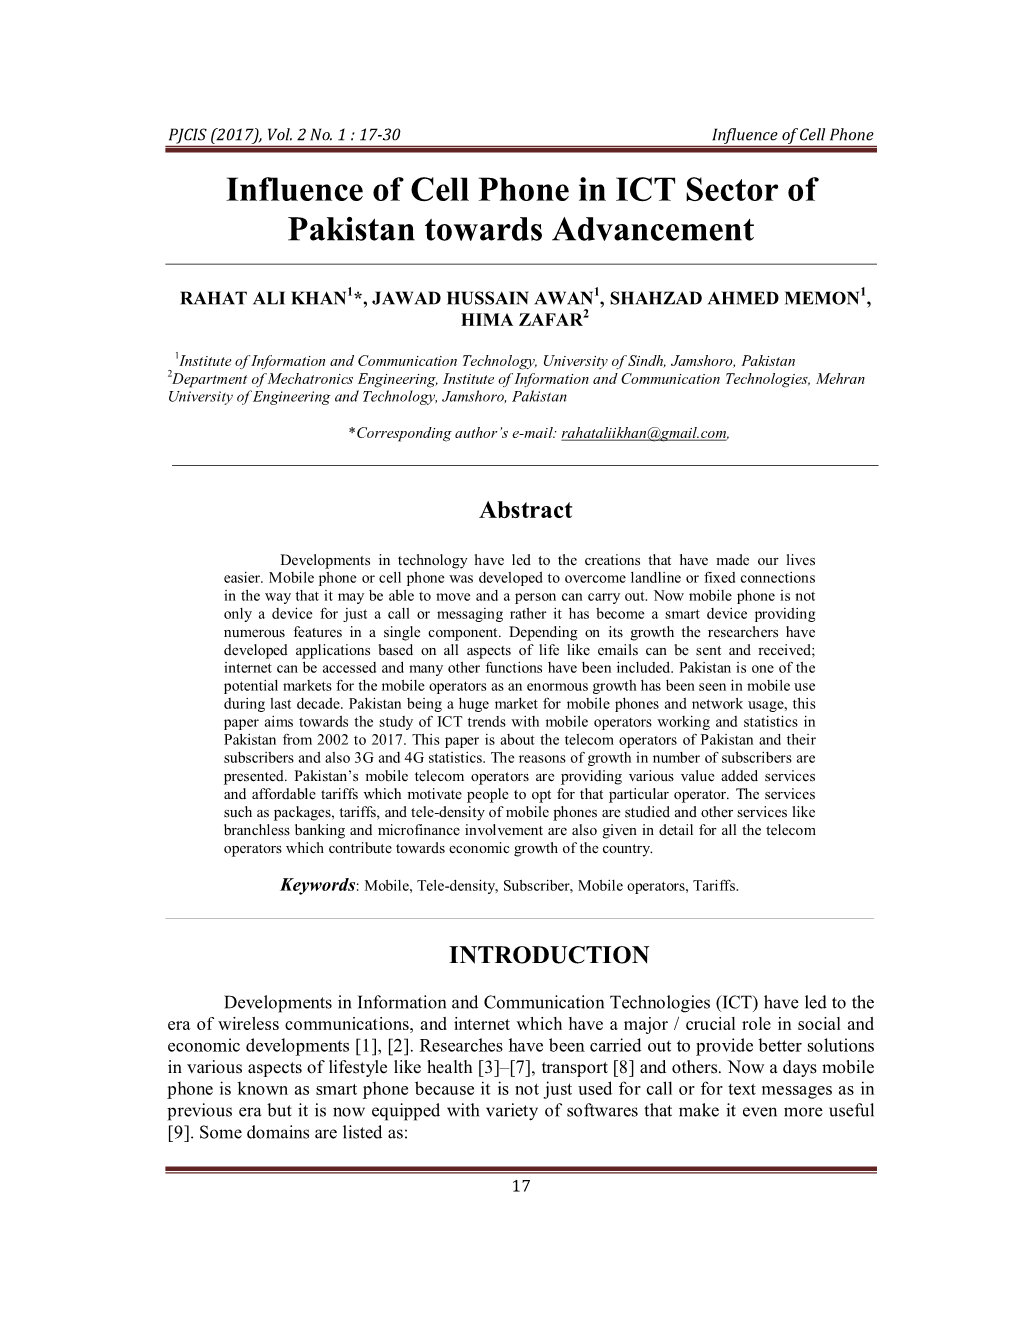 Influence of Cell Phone in ICT Sector of Pakistan Towards Advancement